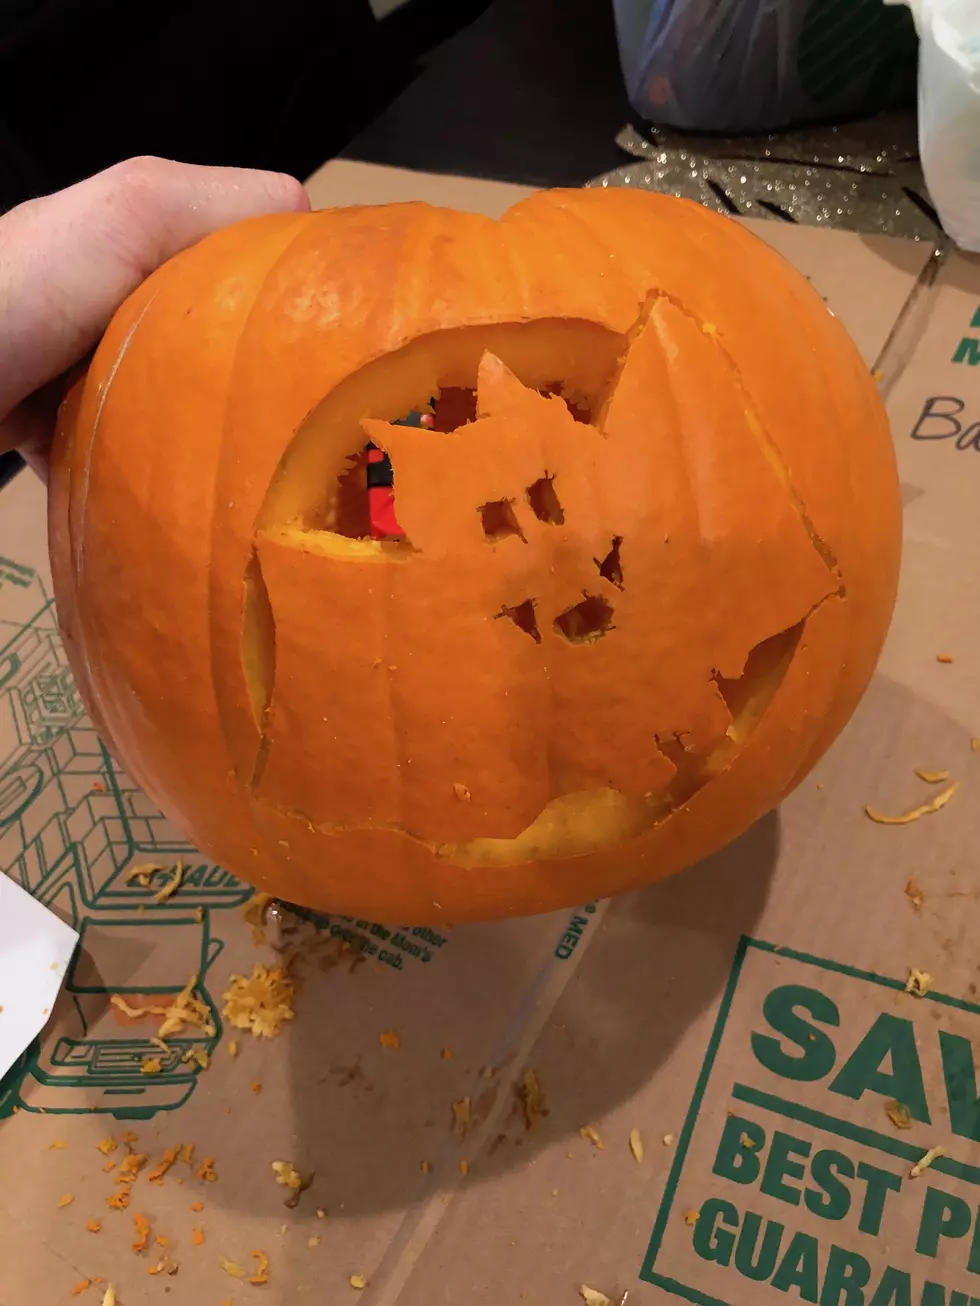 My Pumpkin Carving Never Looks Like The Picture!